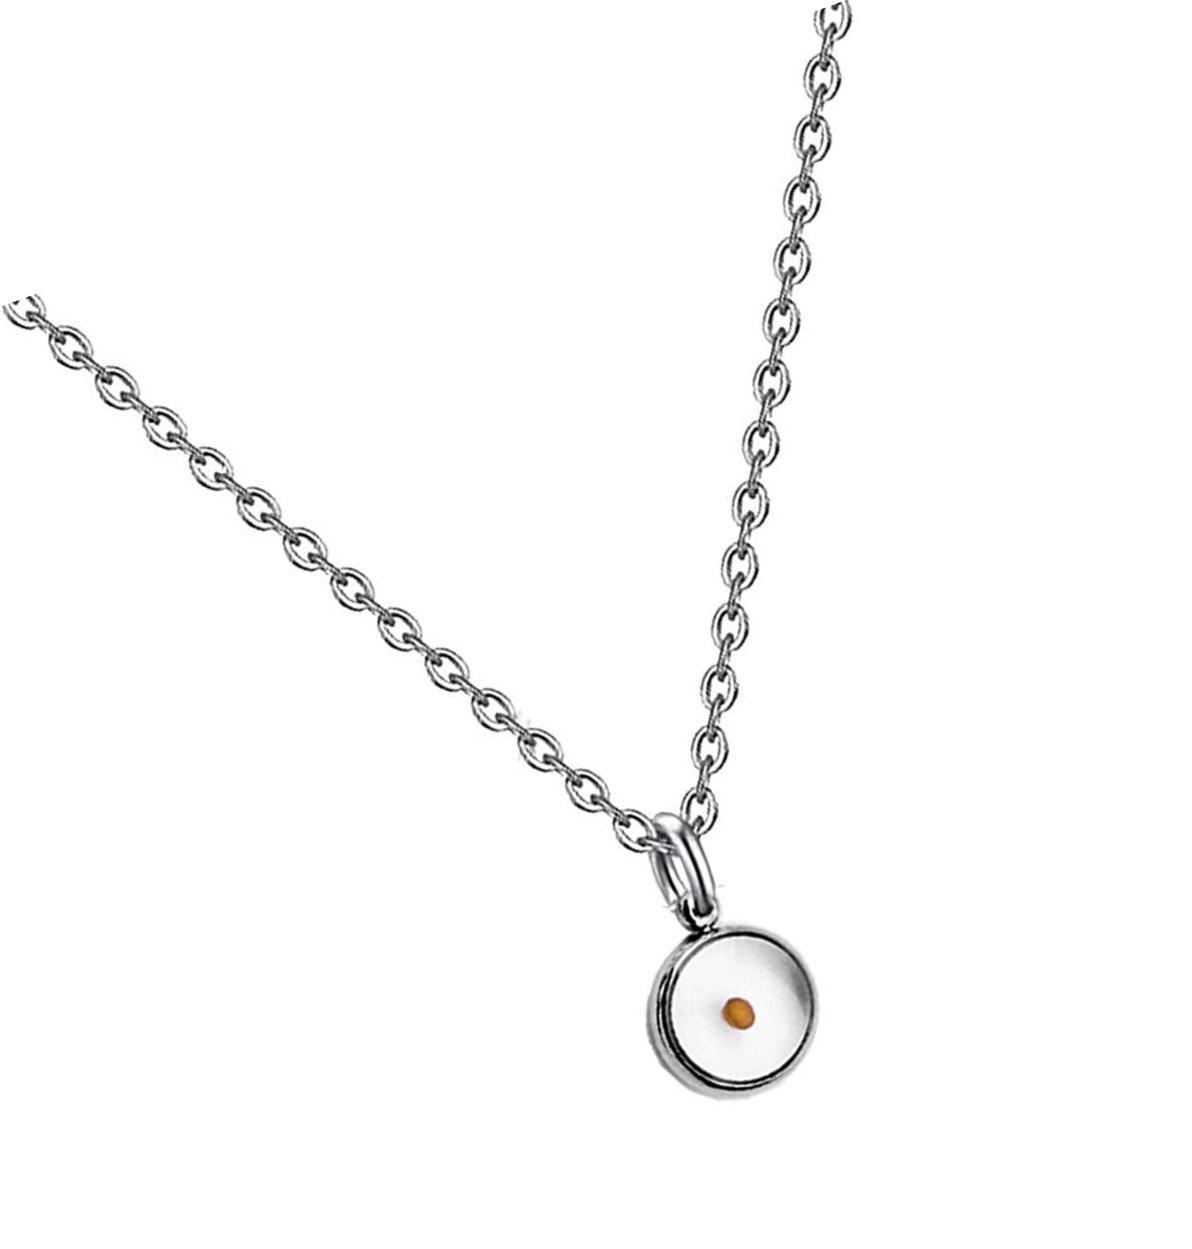 Primary image for Dainty Mustard Seed Pendant Necklace for Women Girls